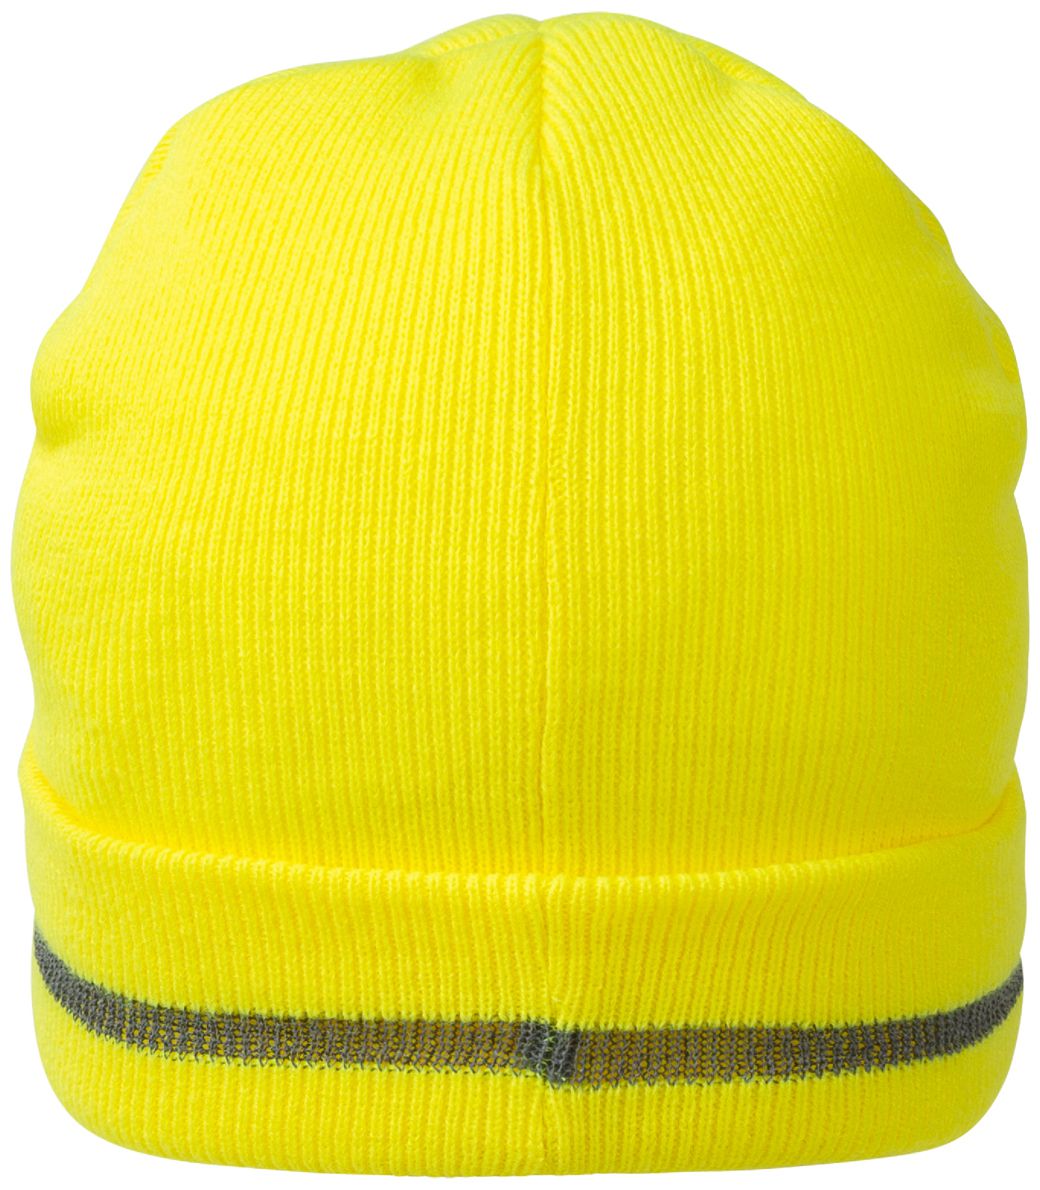 NITRAS 730 KIDS winter beanie - knitted beanie for children - warm & soft lined beanie for boys & girls - warning yellow